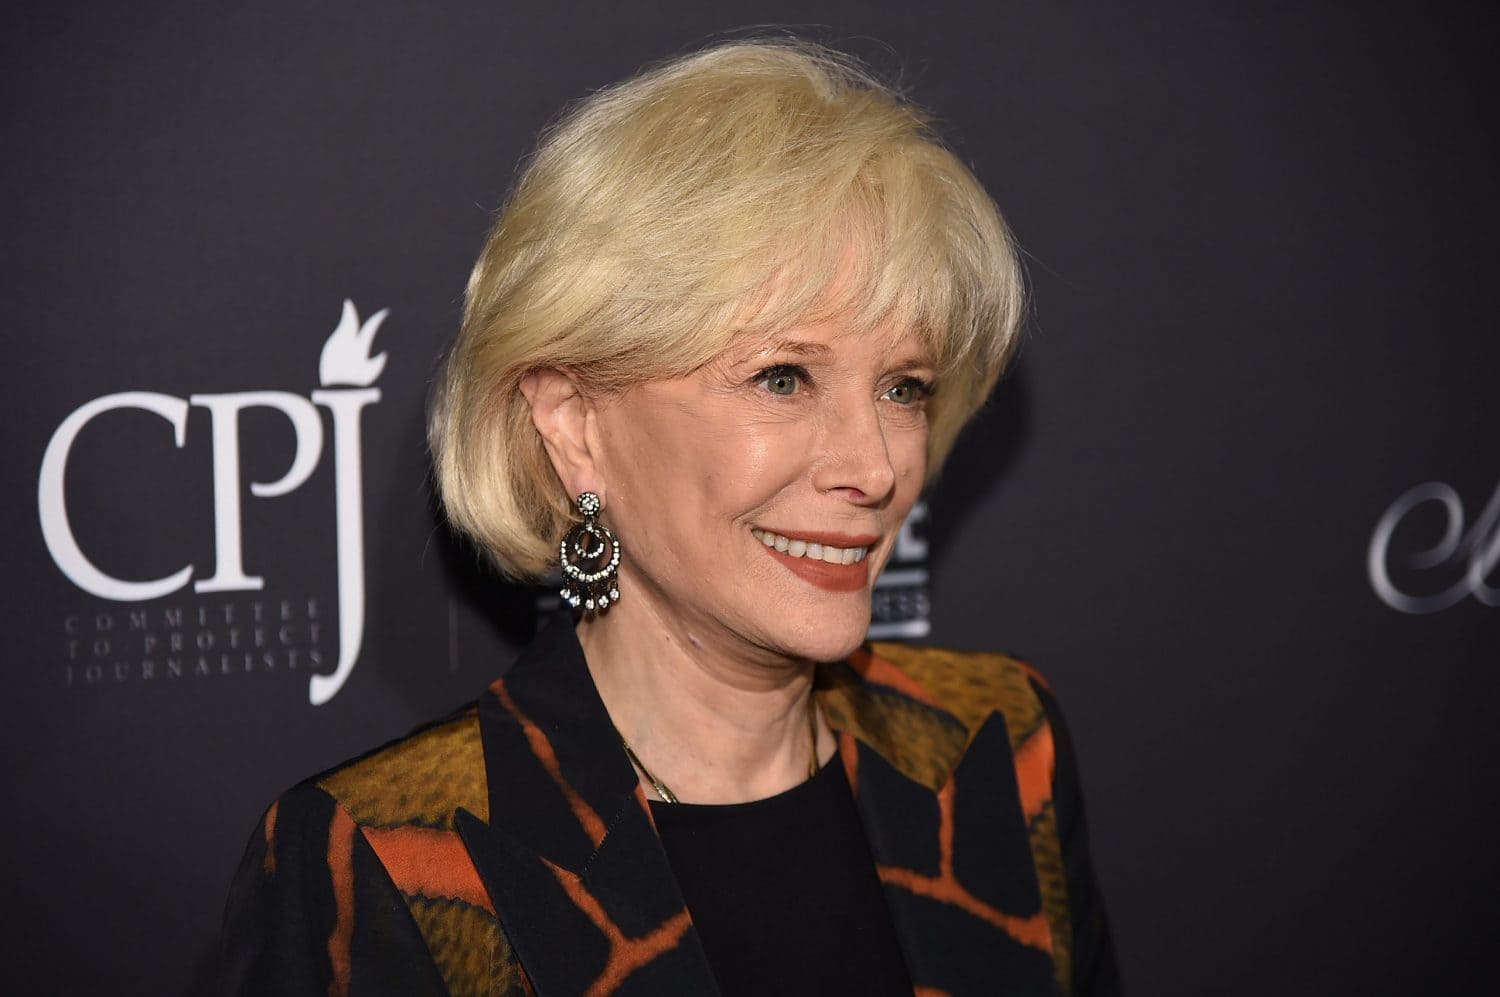 Lesley Stahl (Journalist) Wiki, Age, Biography, Facts & More 3